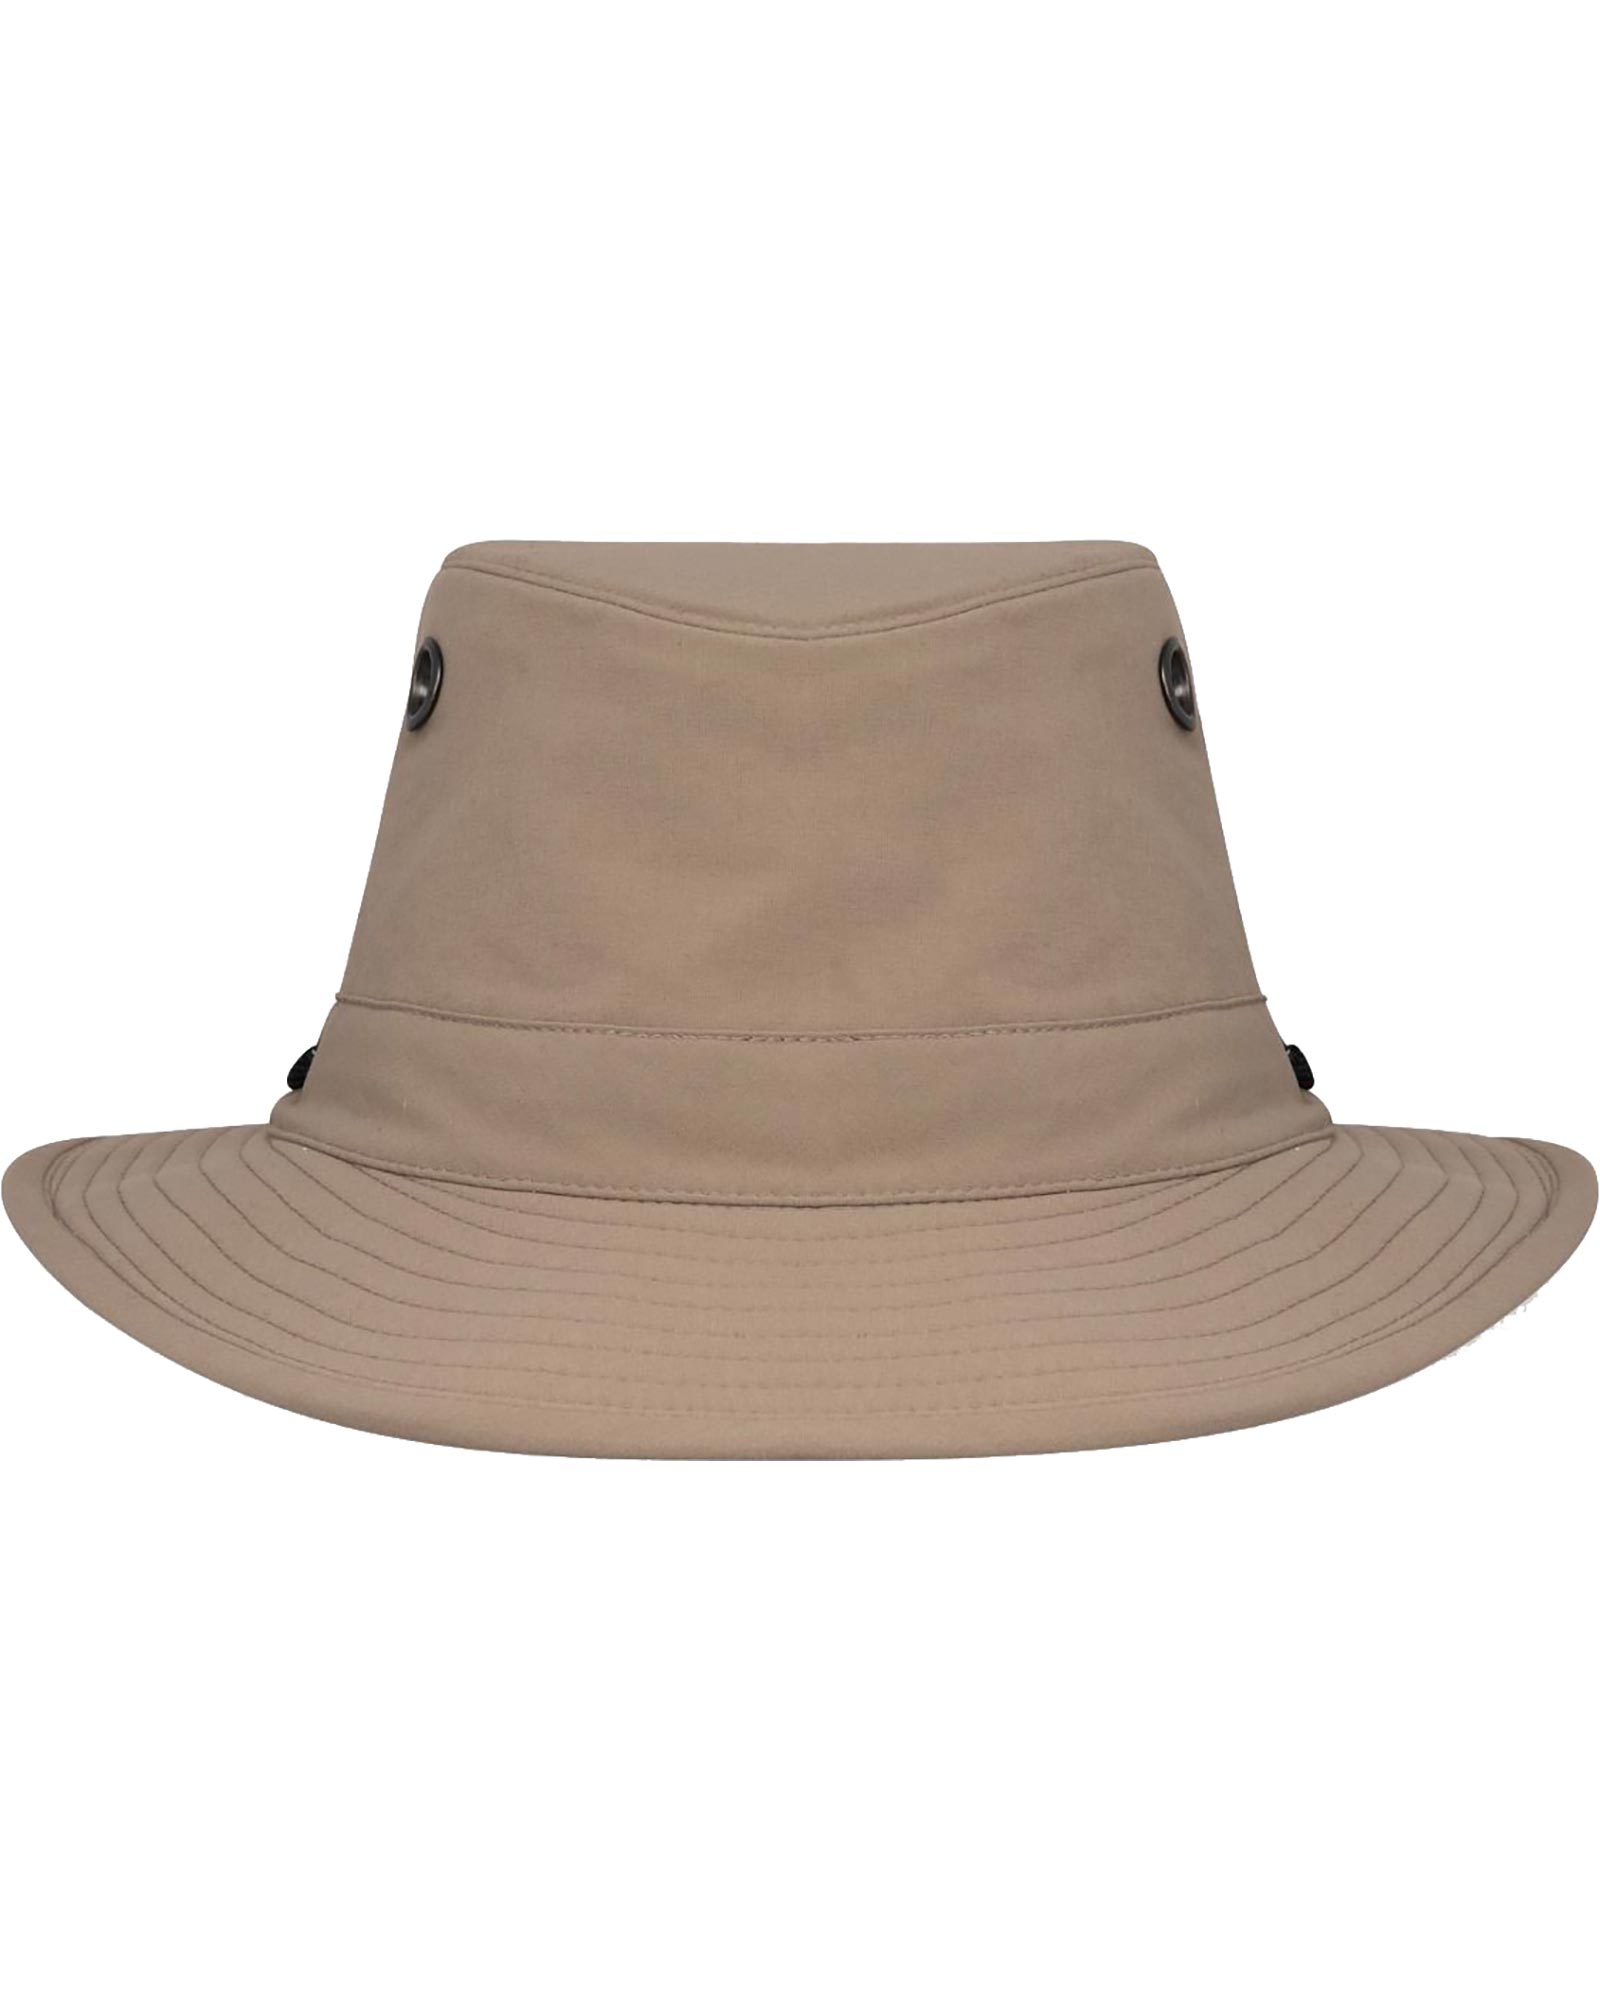 Tilley Breathable Bucket Hat - Taupe 7 3/4